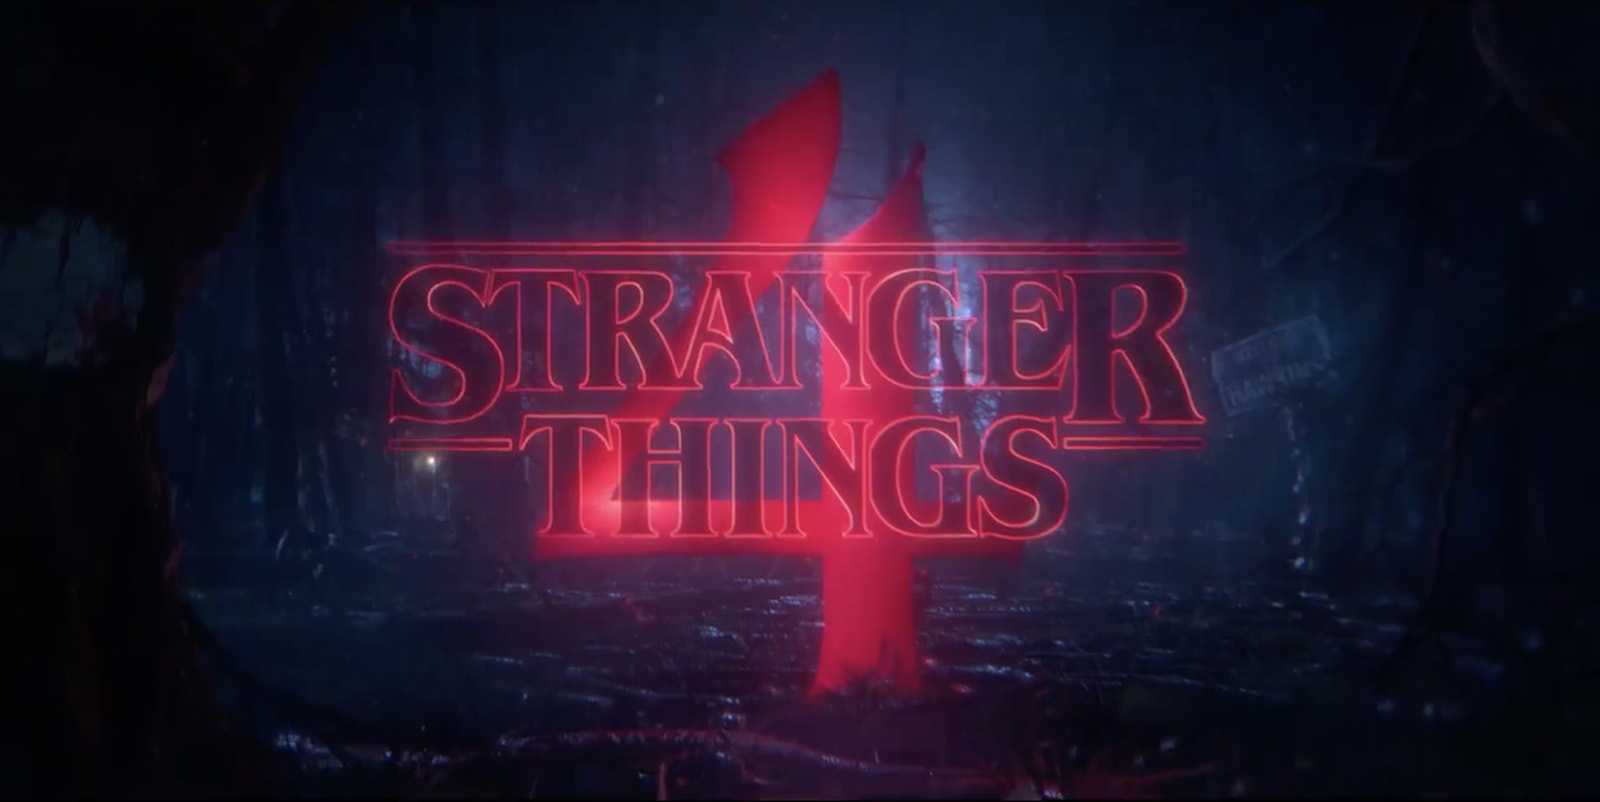 Netflix announced that "Stranger Things" is renewed for a fourth season with a teaser clip showcasing a spooky "Stranger Things 4" logo and the ominous declaration that "We're not in Hawkins anymore." (Netflix/Twitter/TNS)